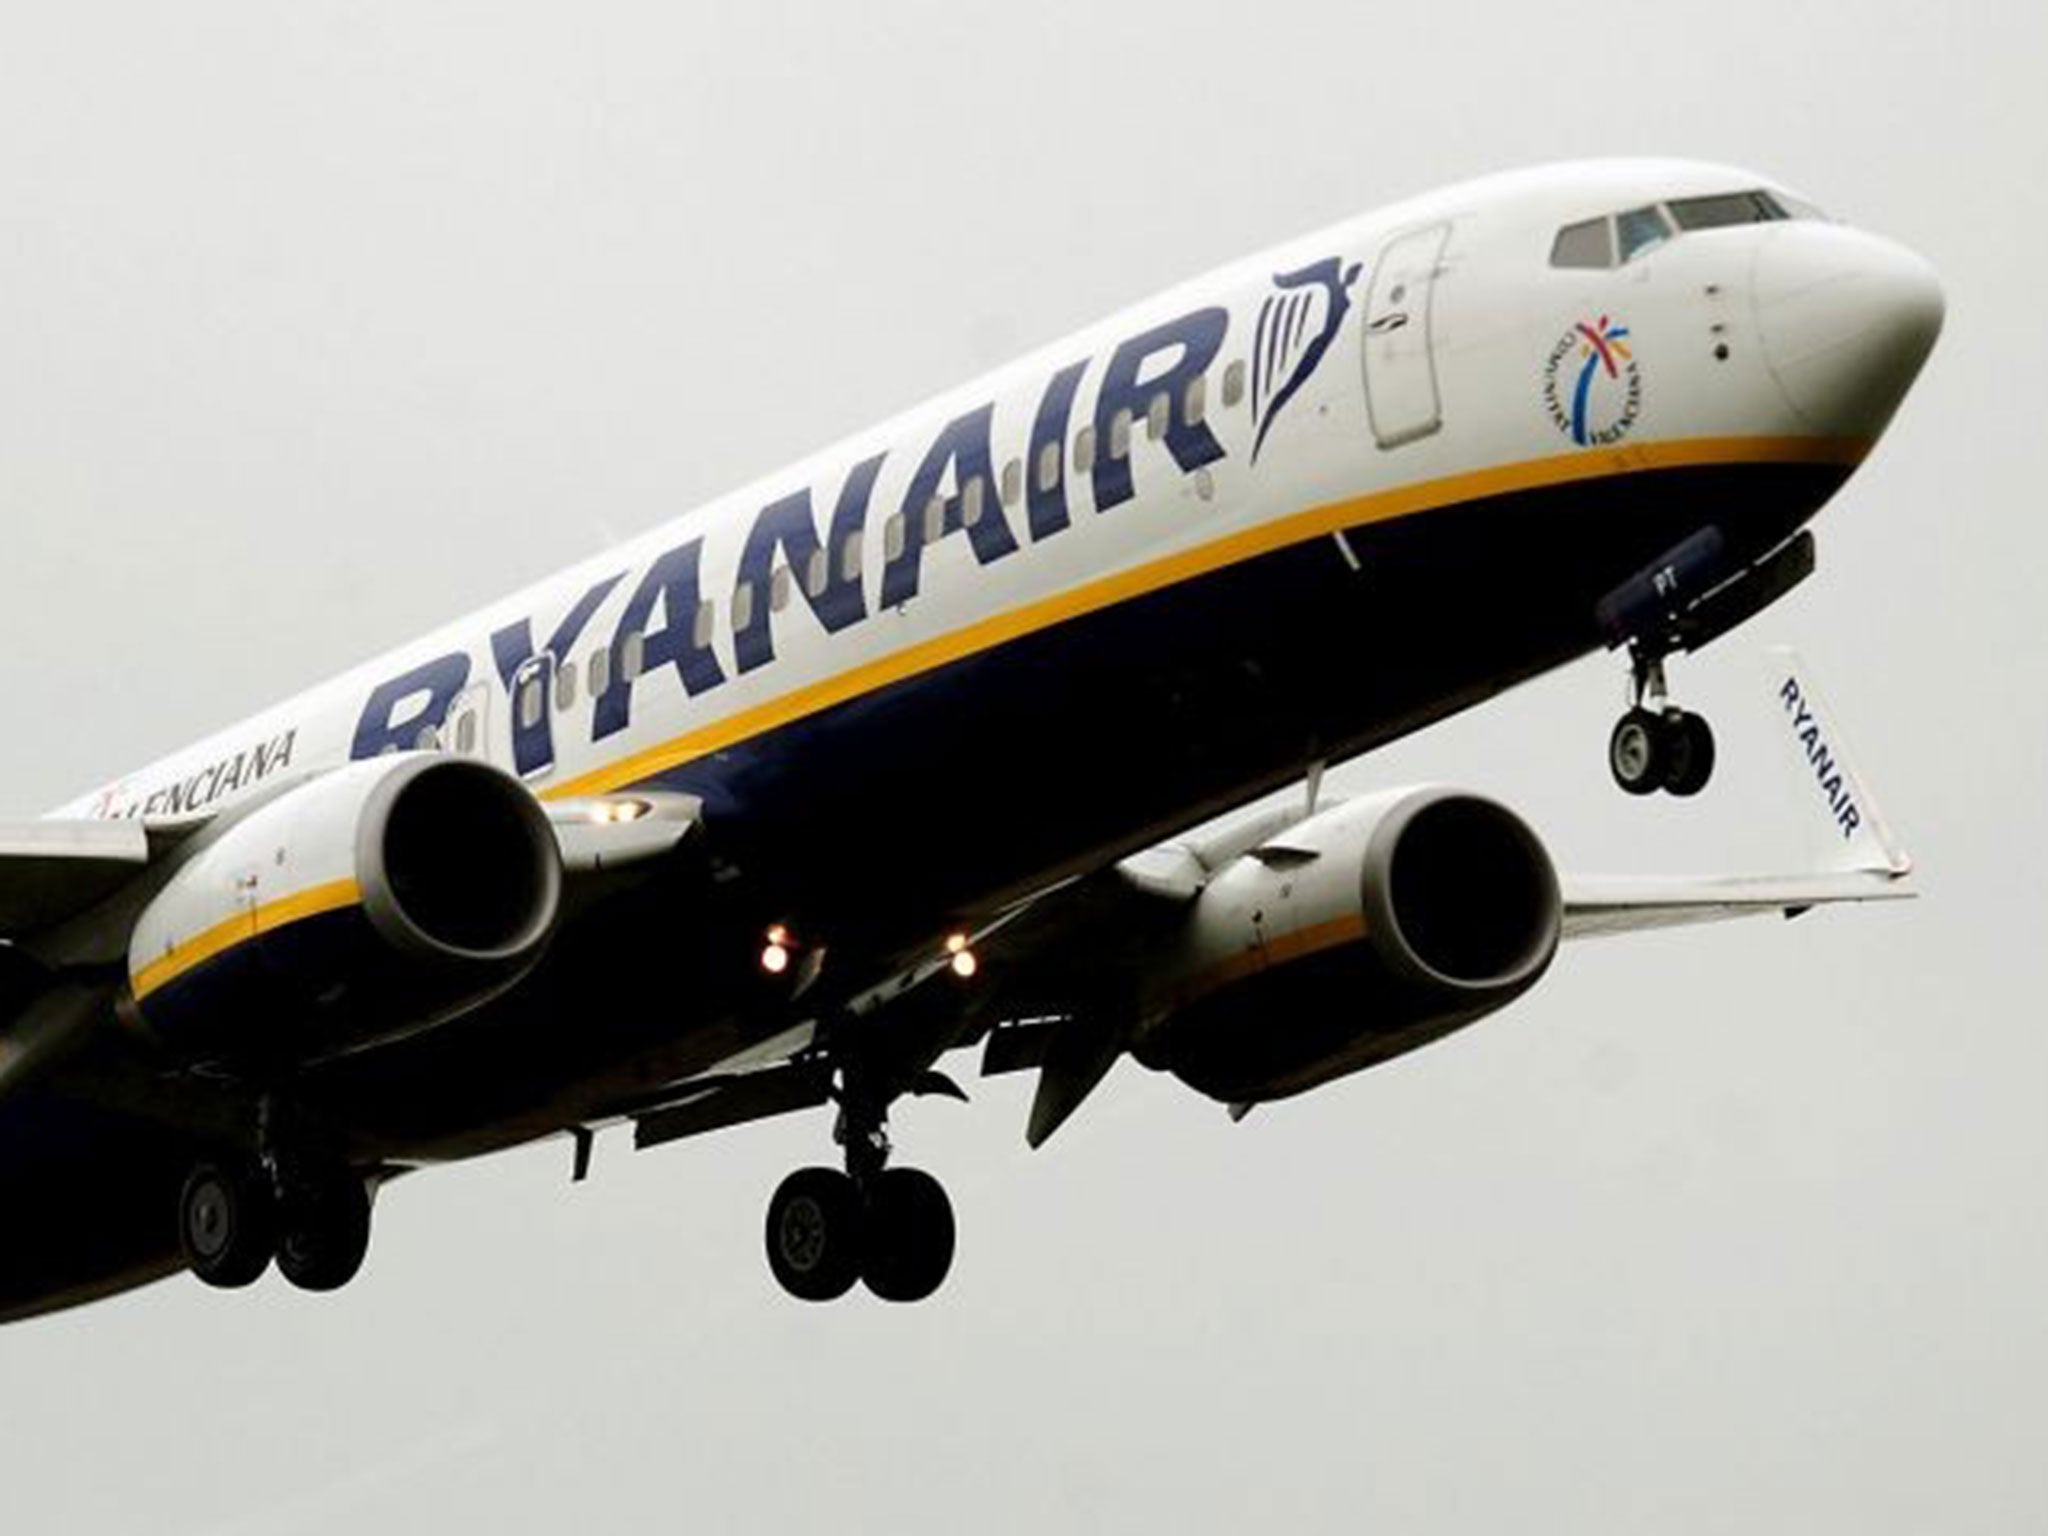 Ryanair is famed for its PR gaffes